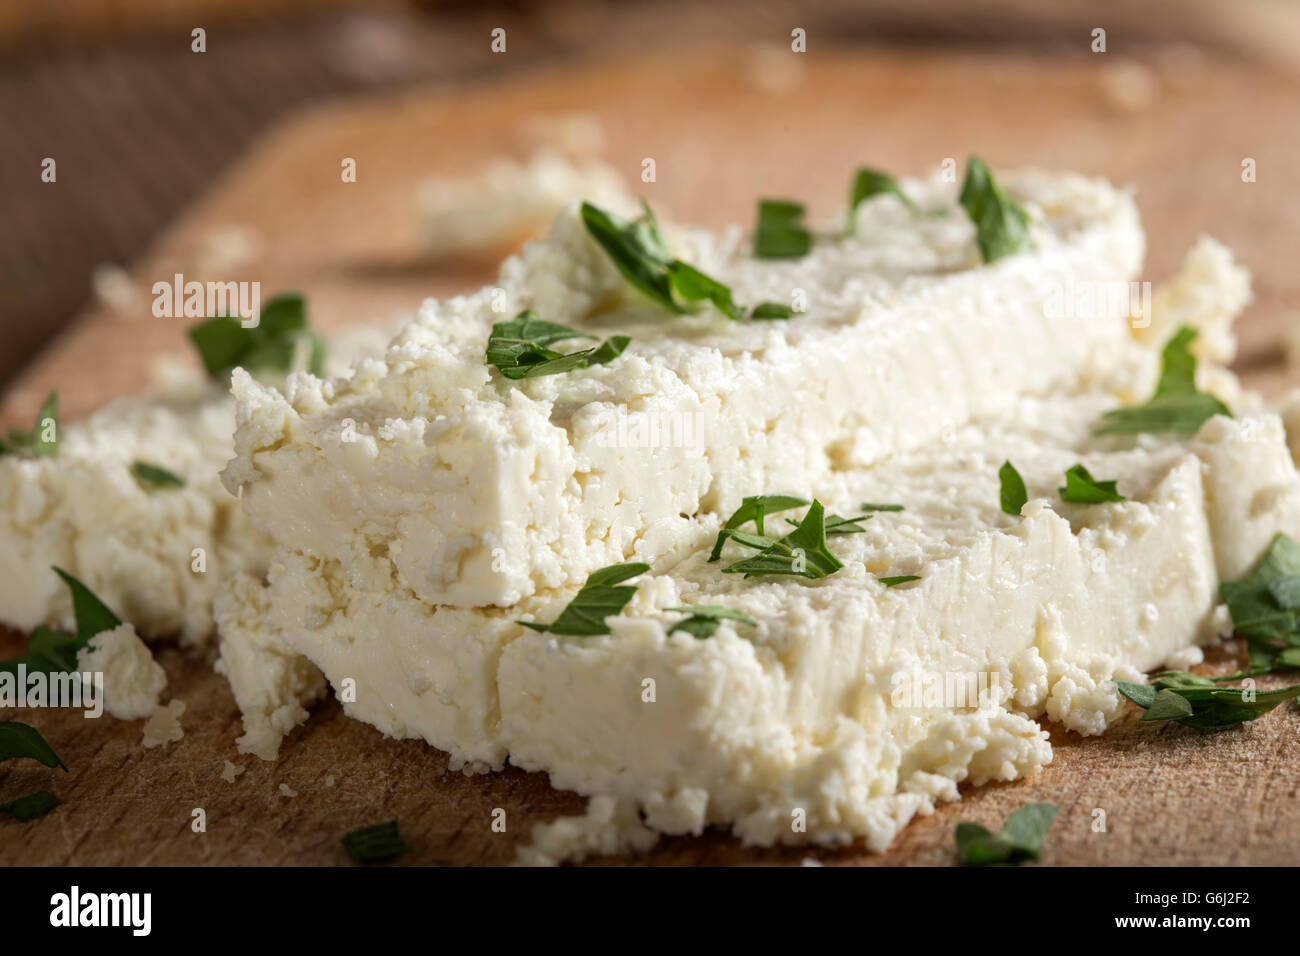 Fresh cheese slices on a wooden background with parsley Stock Photo